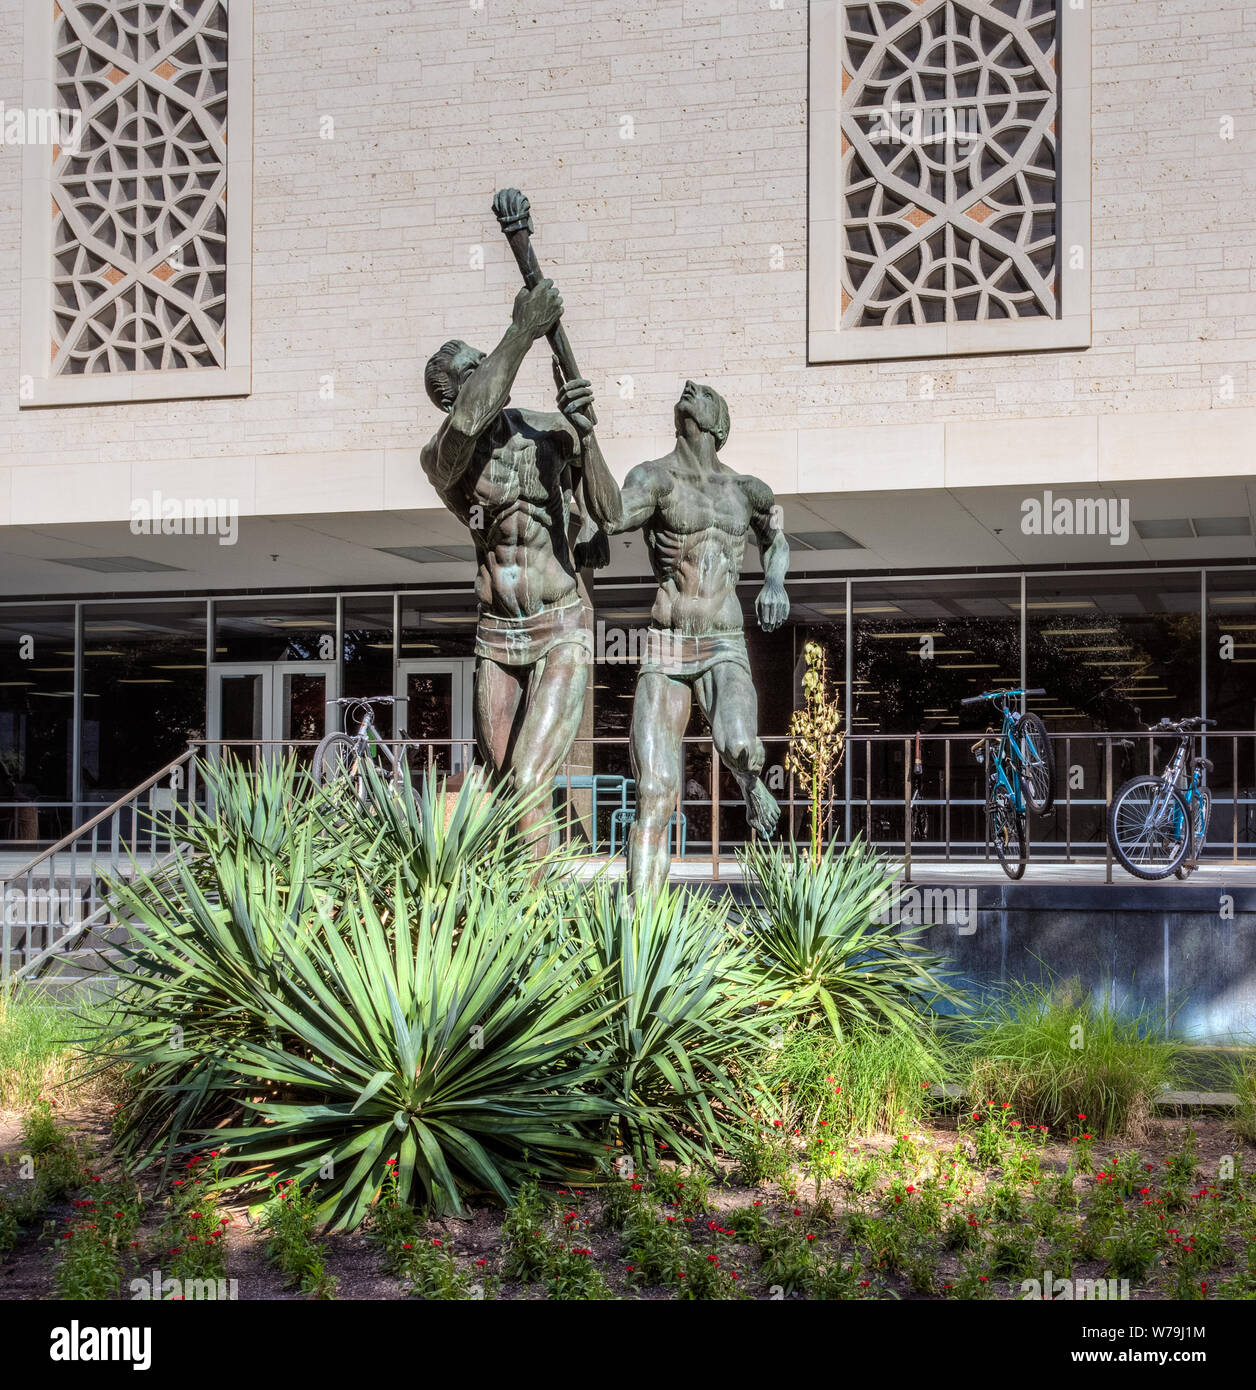 AUSTIN,TX/USA - NOVEMBER 14:  The Torchbearers Sculpture on the campus of the University of Texas, a state research university and the flagship instit Stock Photo